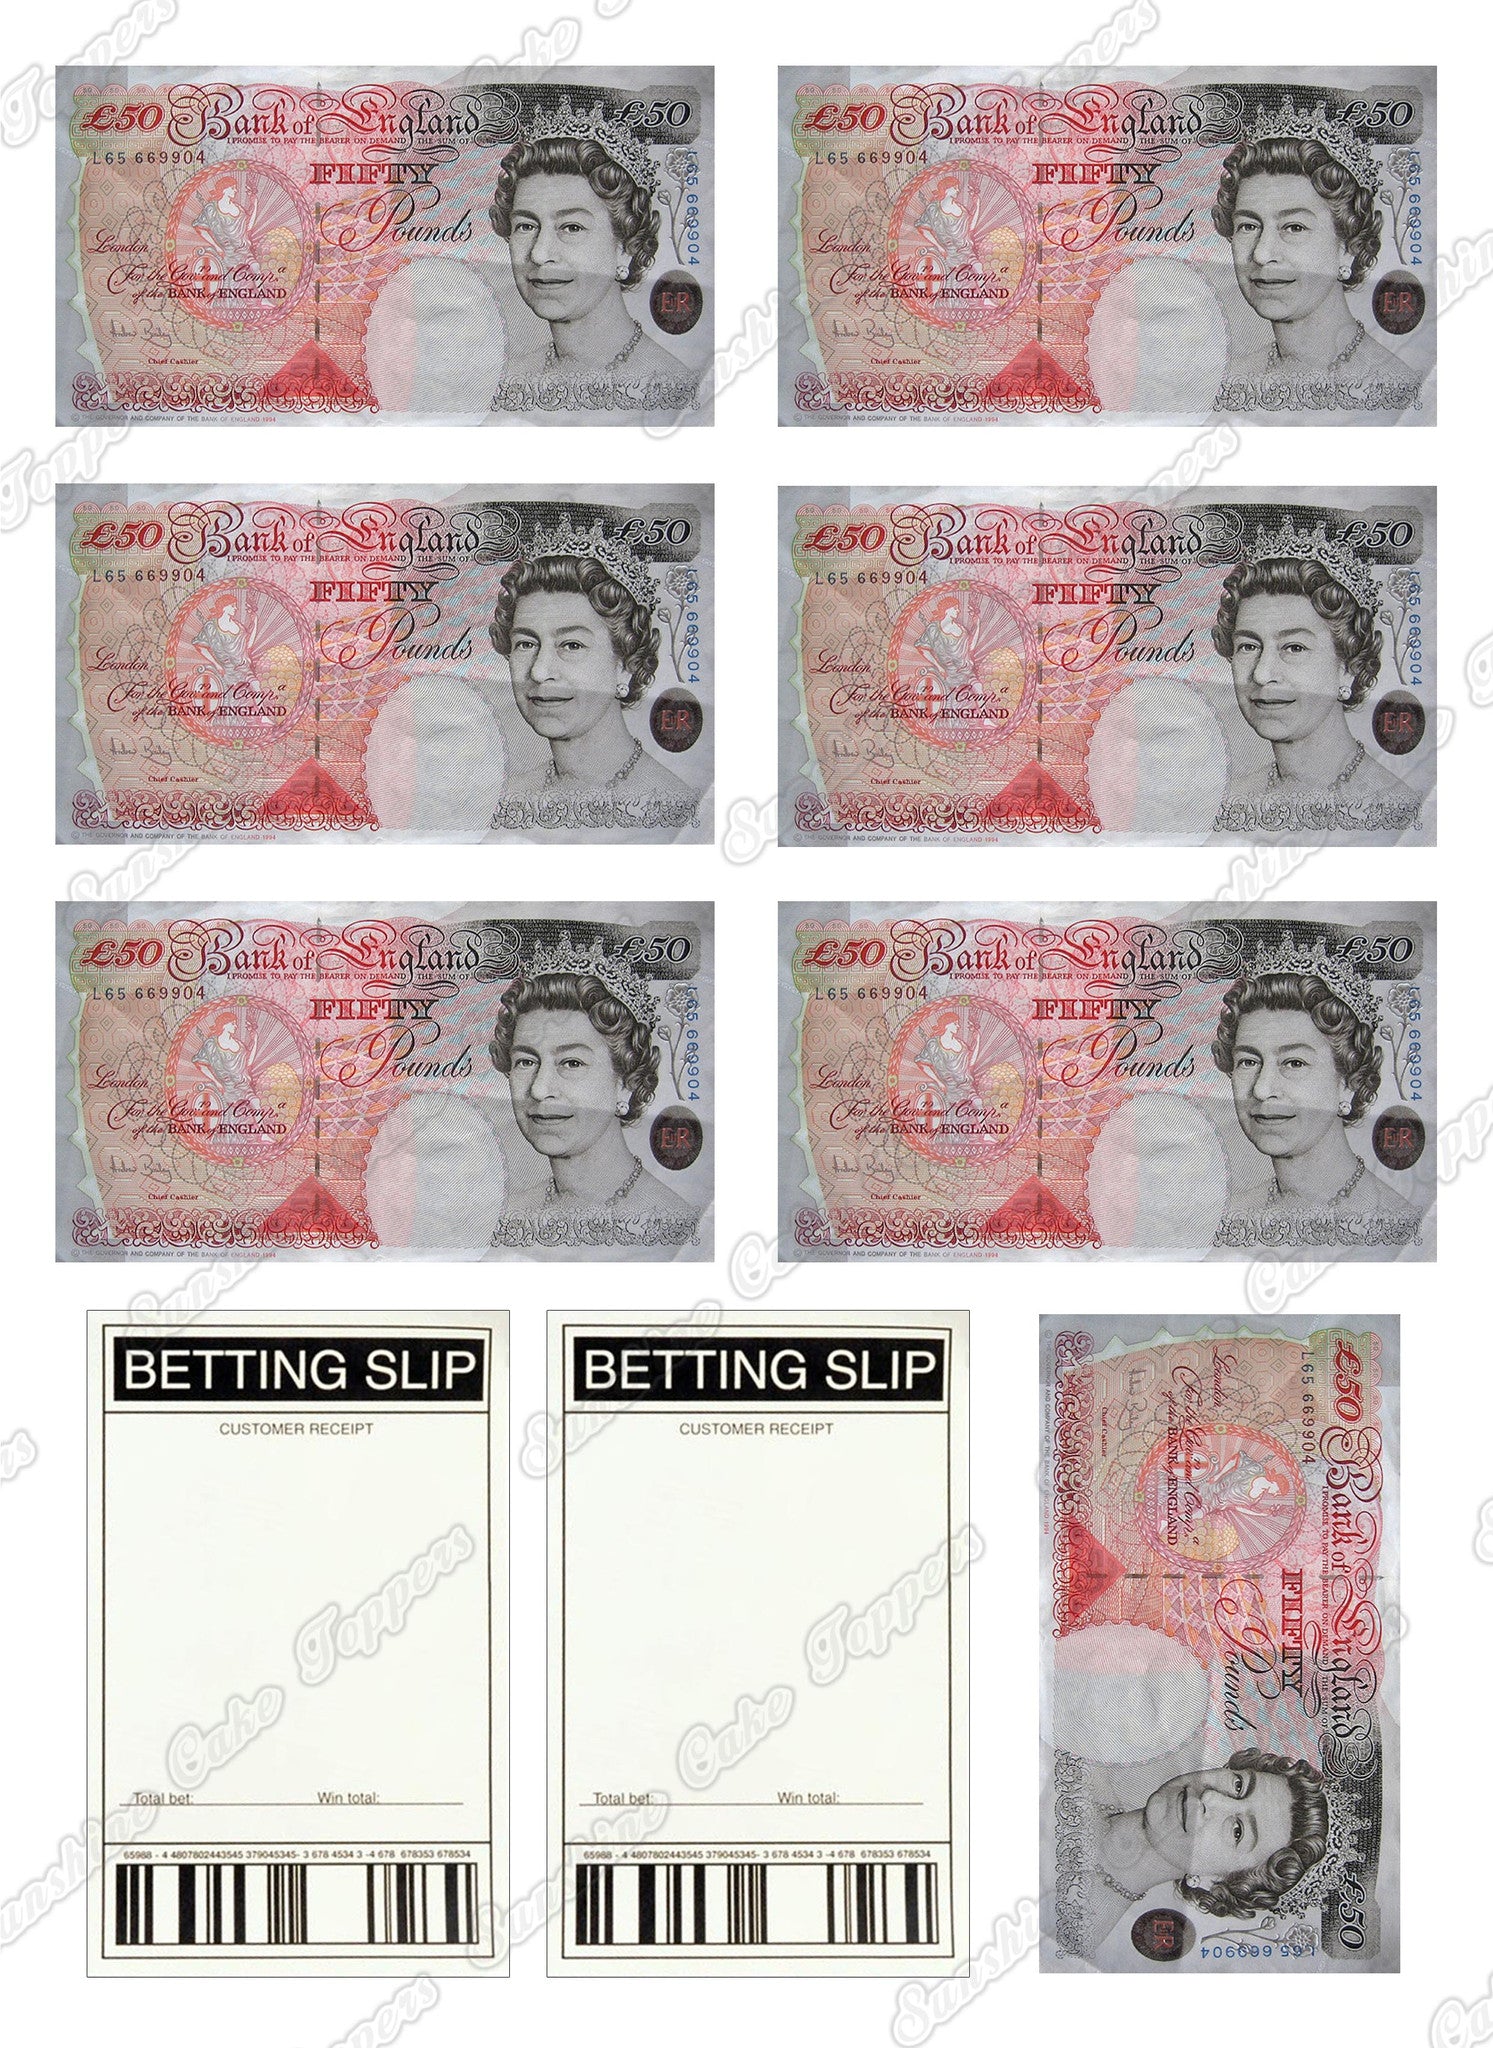 Money £50 Note & Betting Slip Cake Toppers